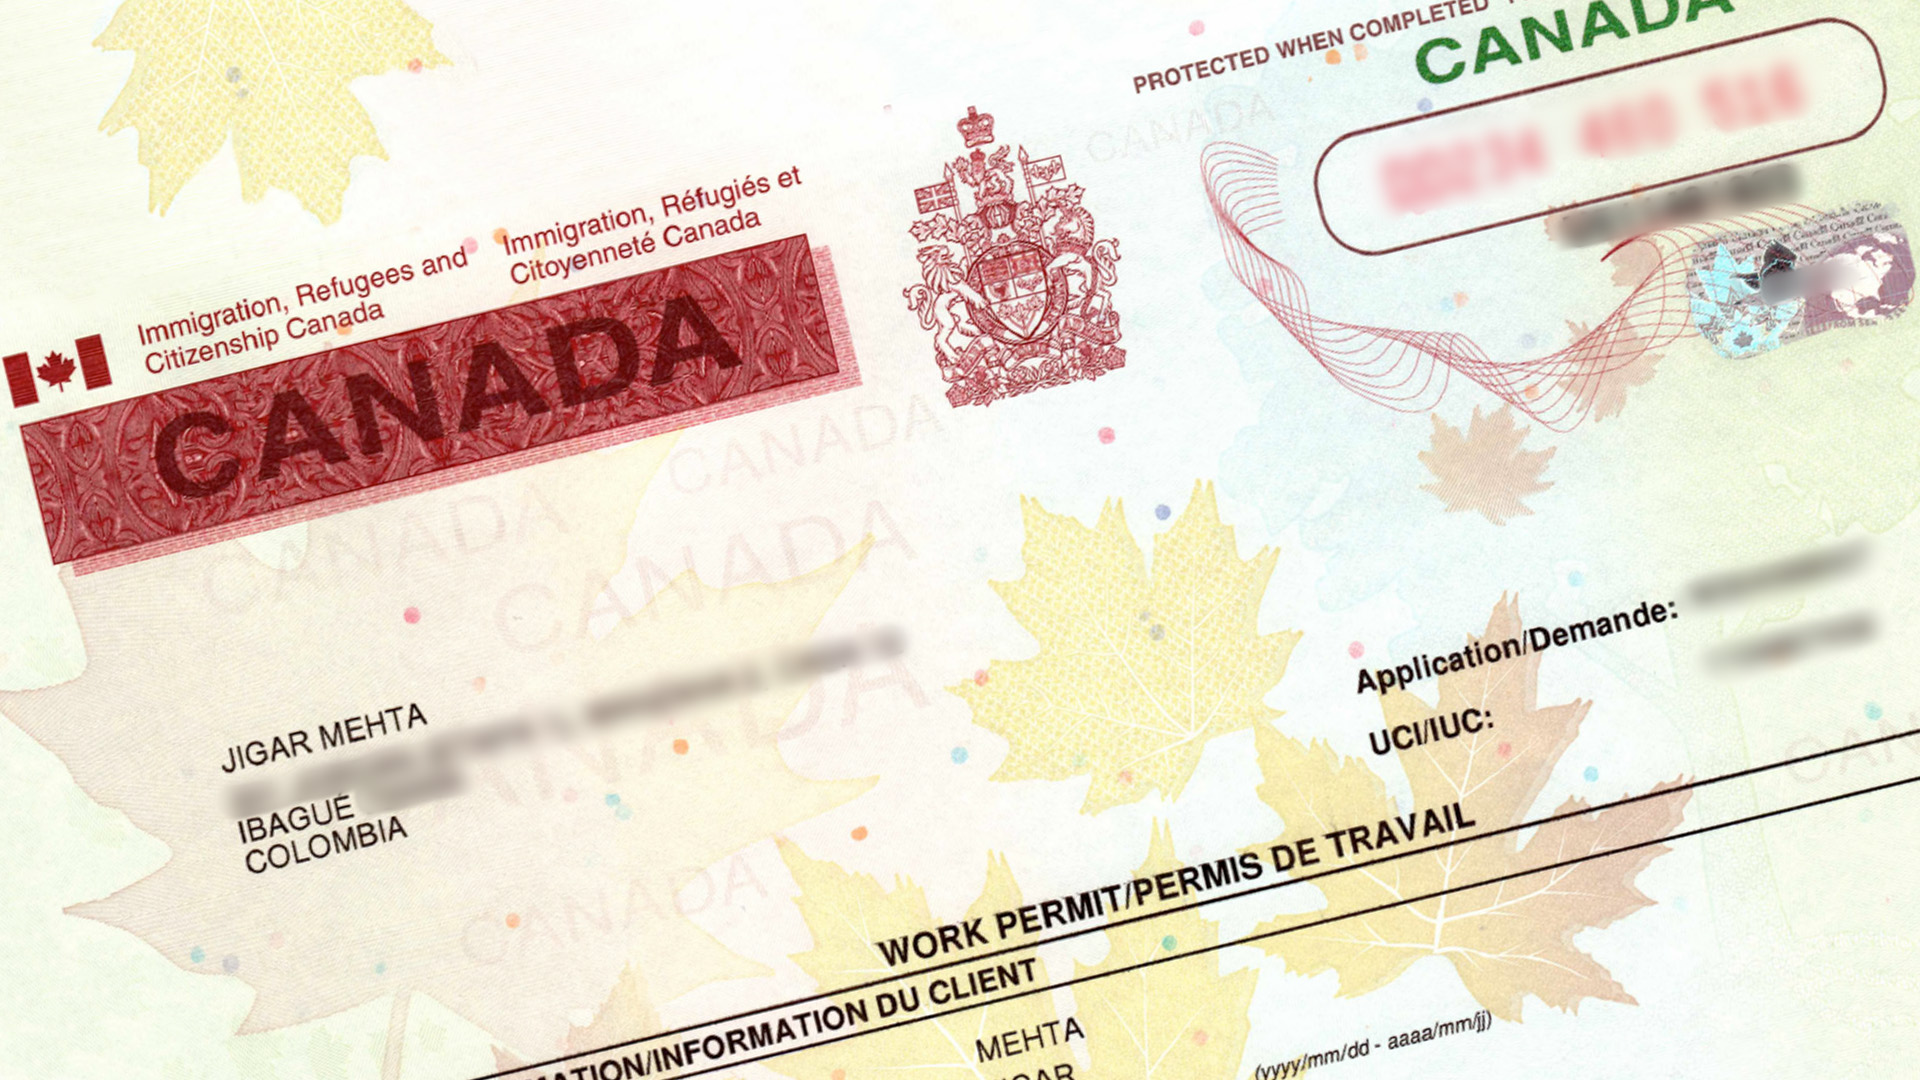 Extension Or Change Of Conditions On Work Permit At A Canadian Port Of  Entry: My Experience And Thoughts | Jigarius.com